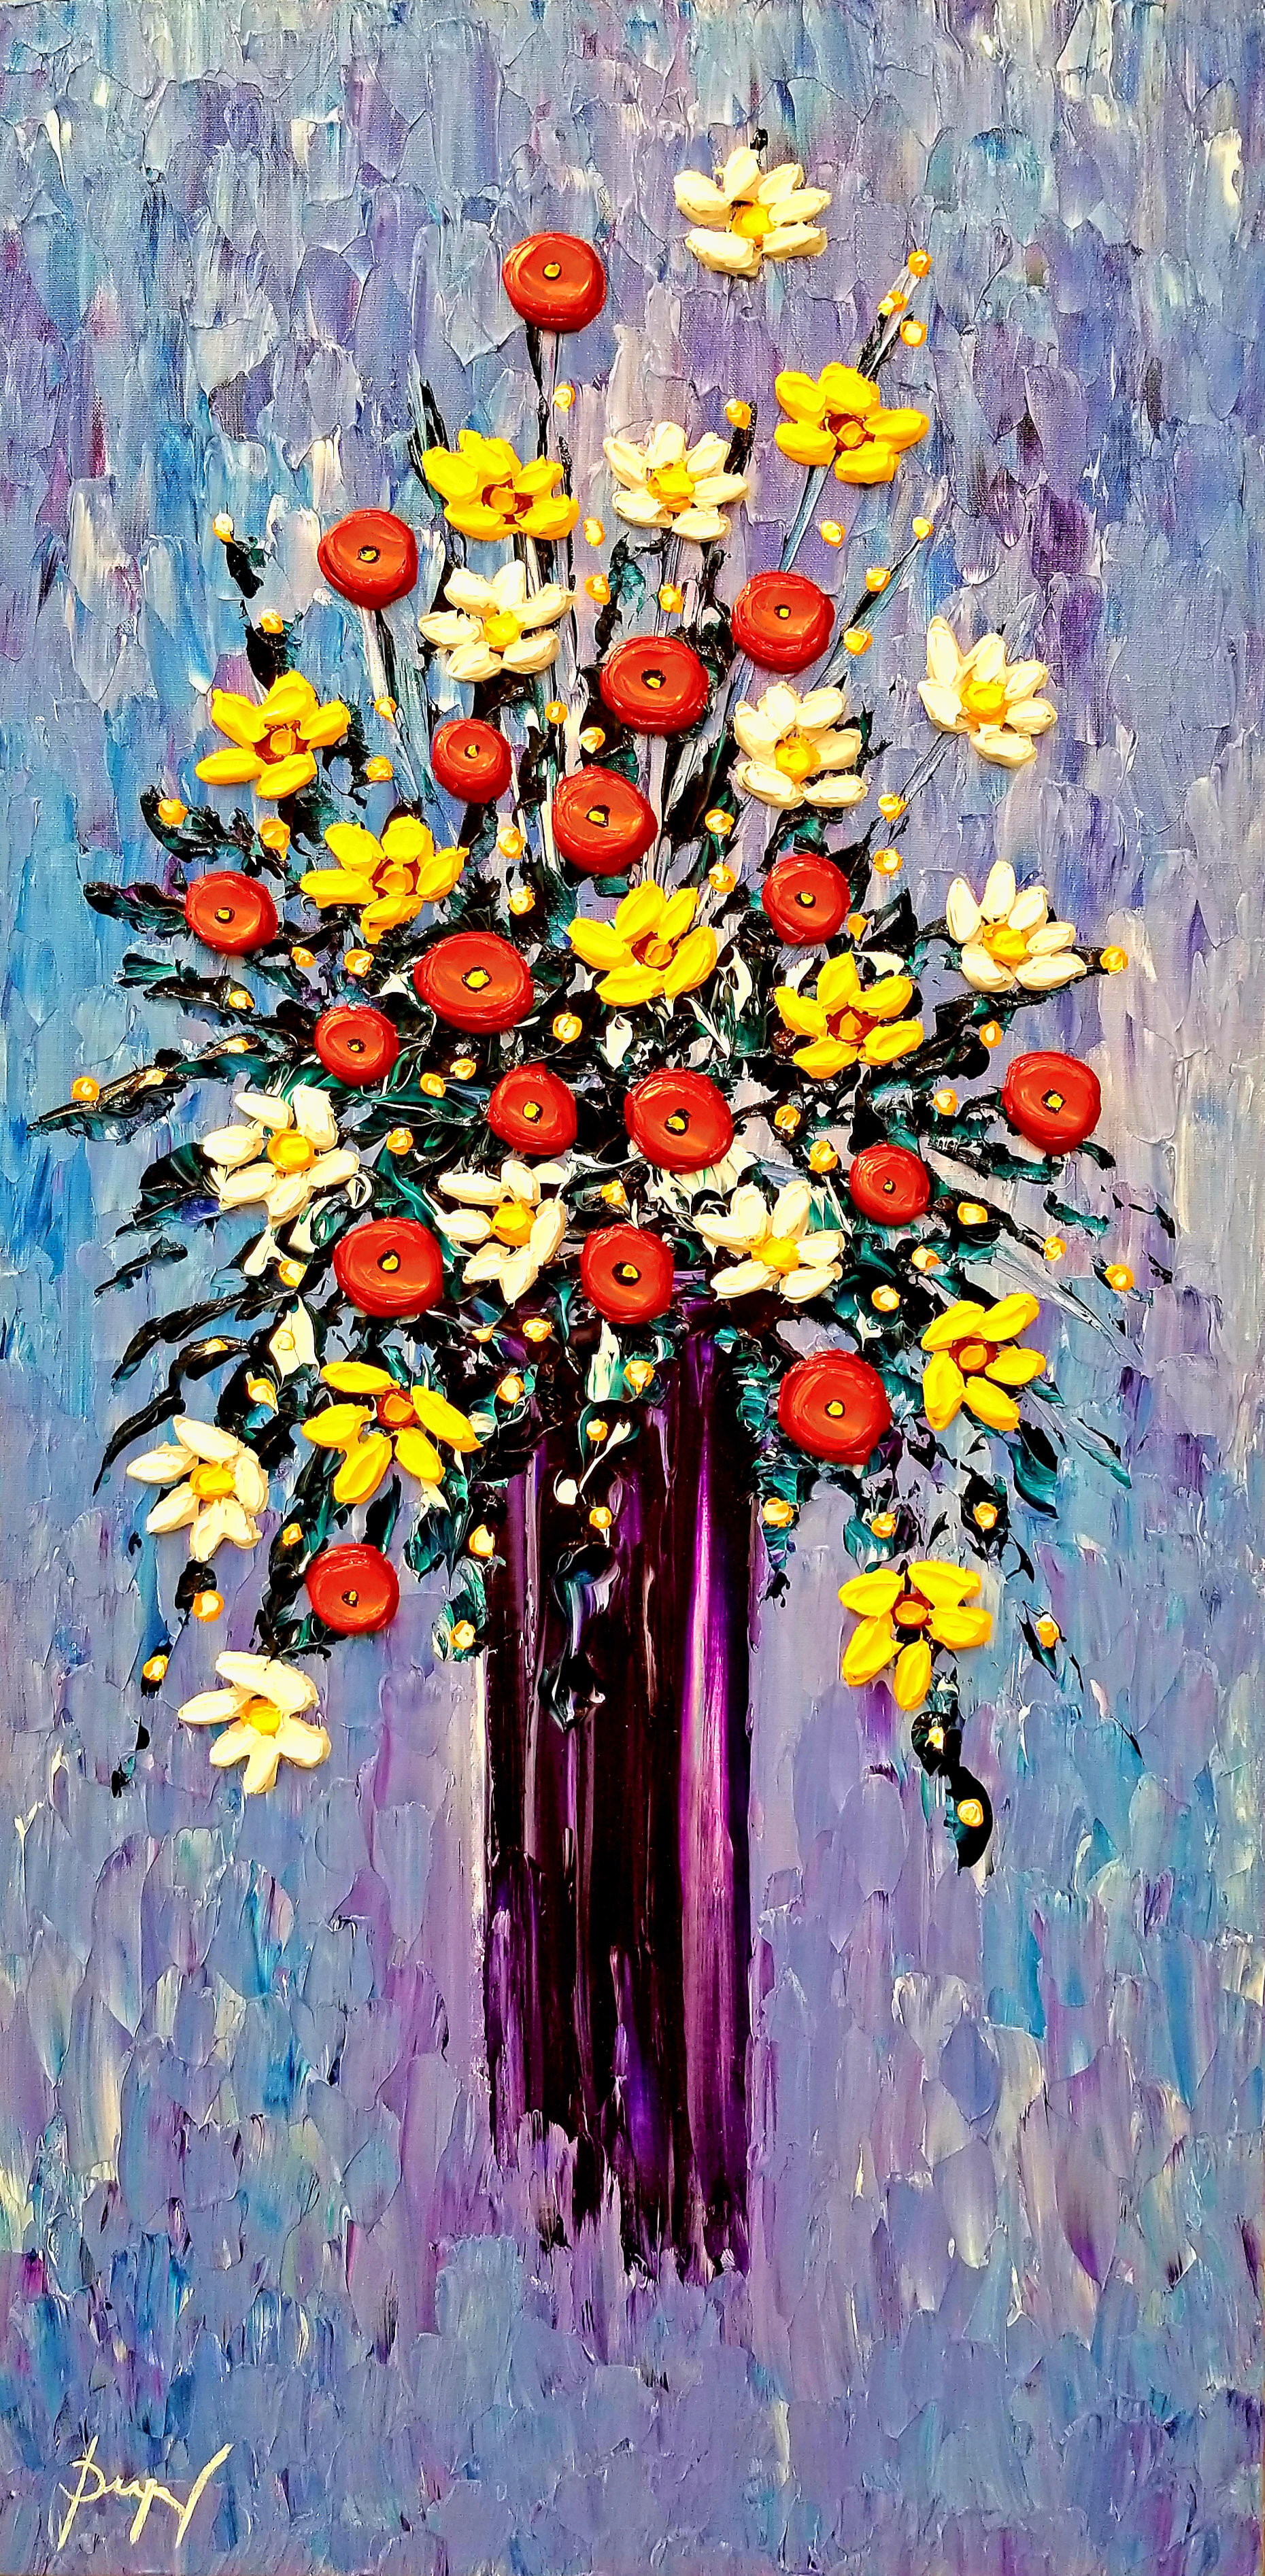 Vase of Colorful Flowers, 